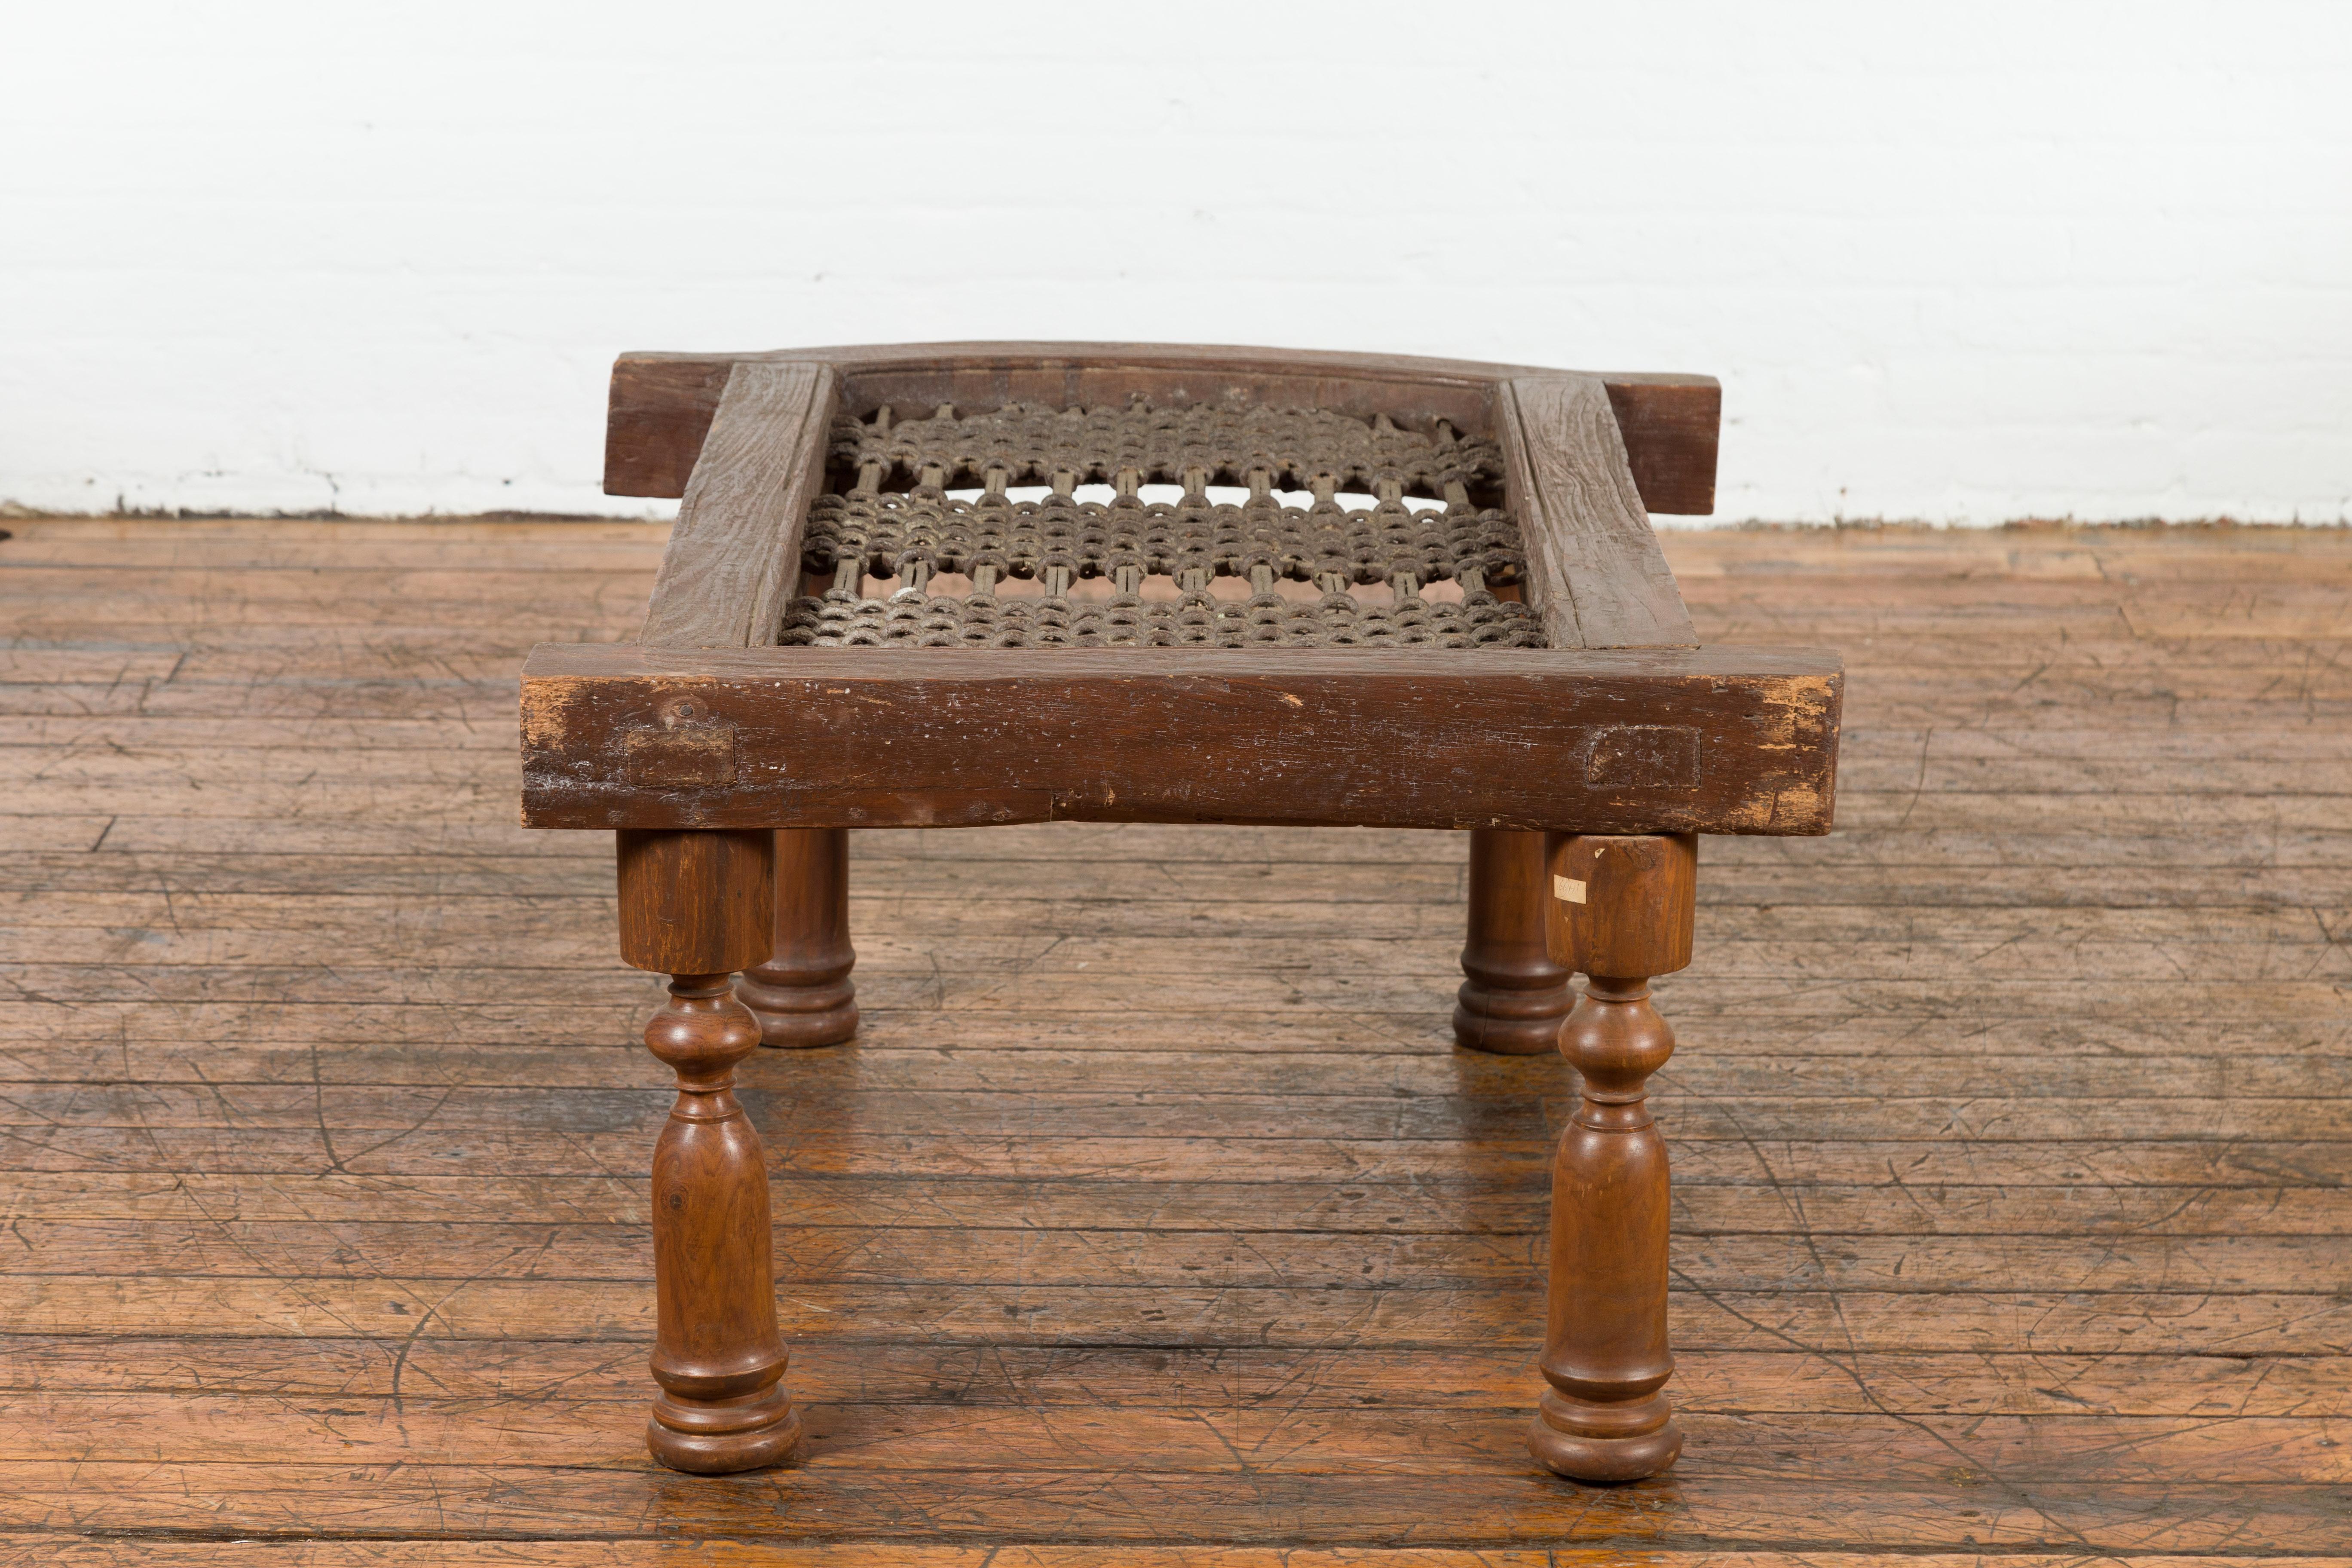 Rustic 19th Century Indian Iron Window Grate Made Into a Coffee Table For Sale 8